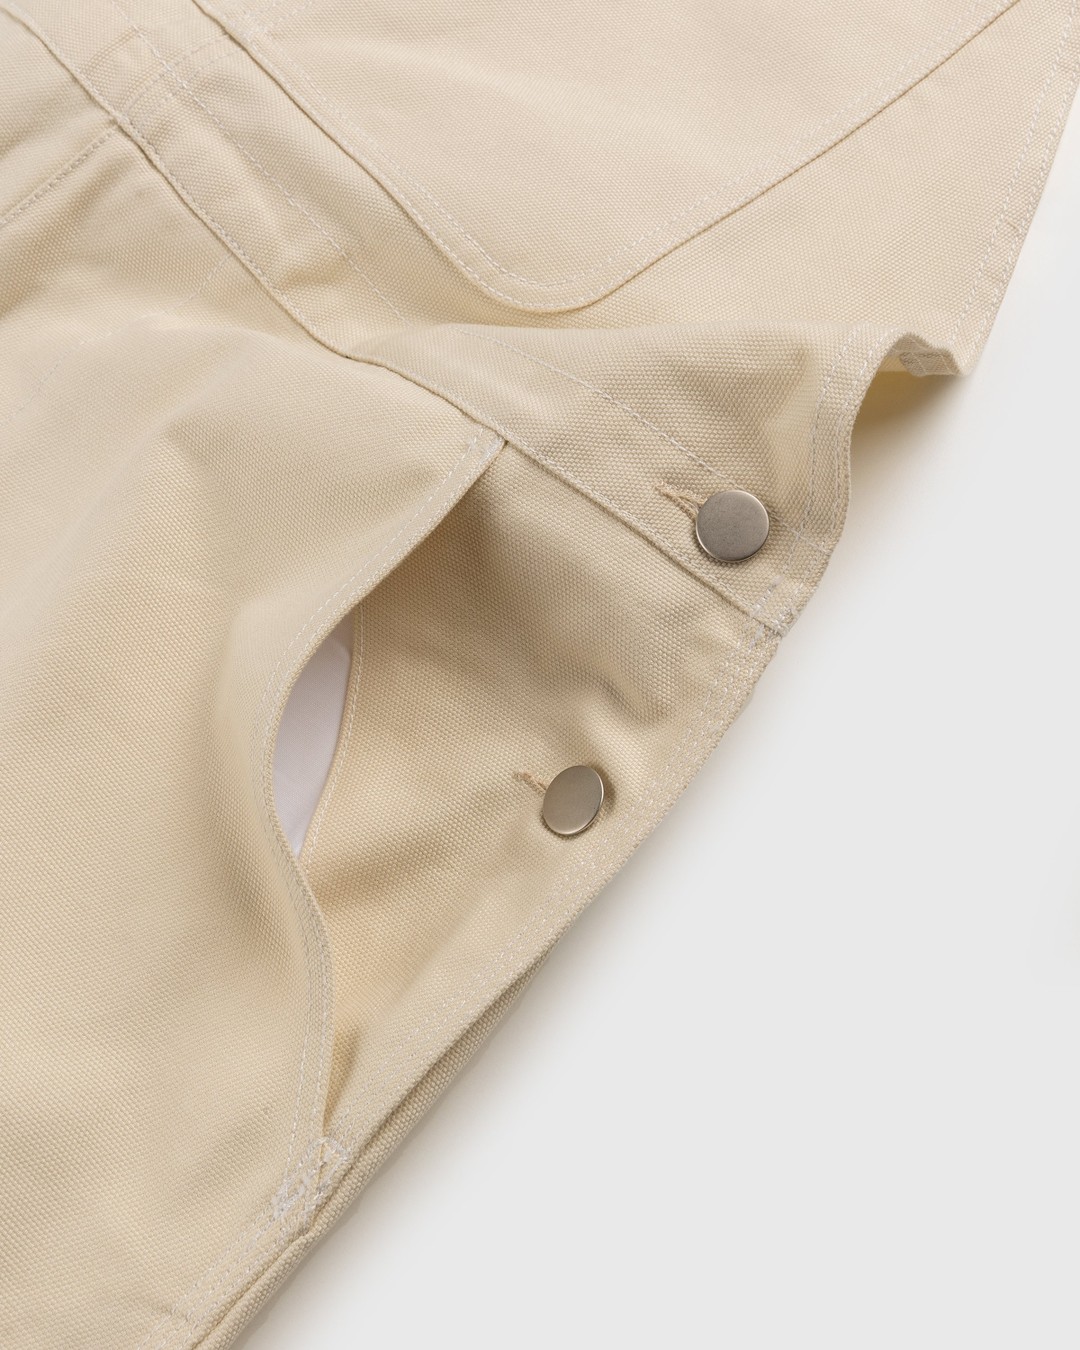 RUF x Highsnobiety – Cotton Overalls Natural - Pants - Beige - Image 7